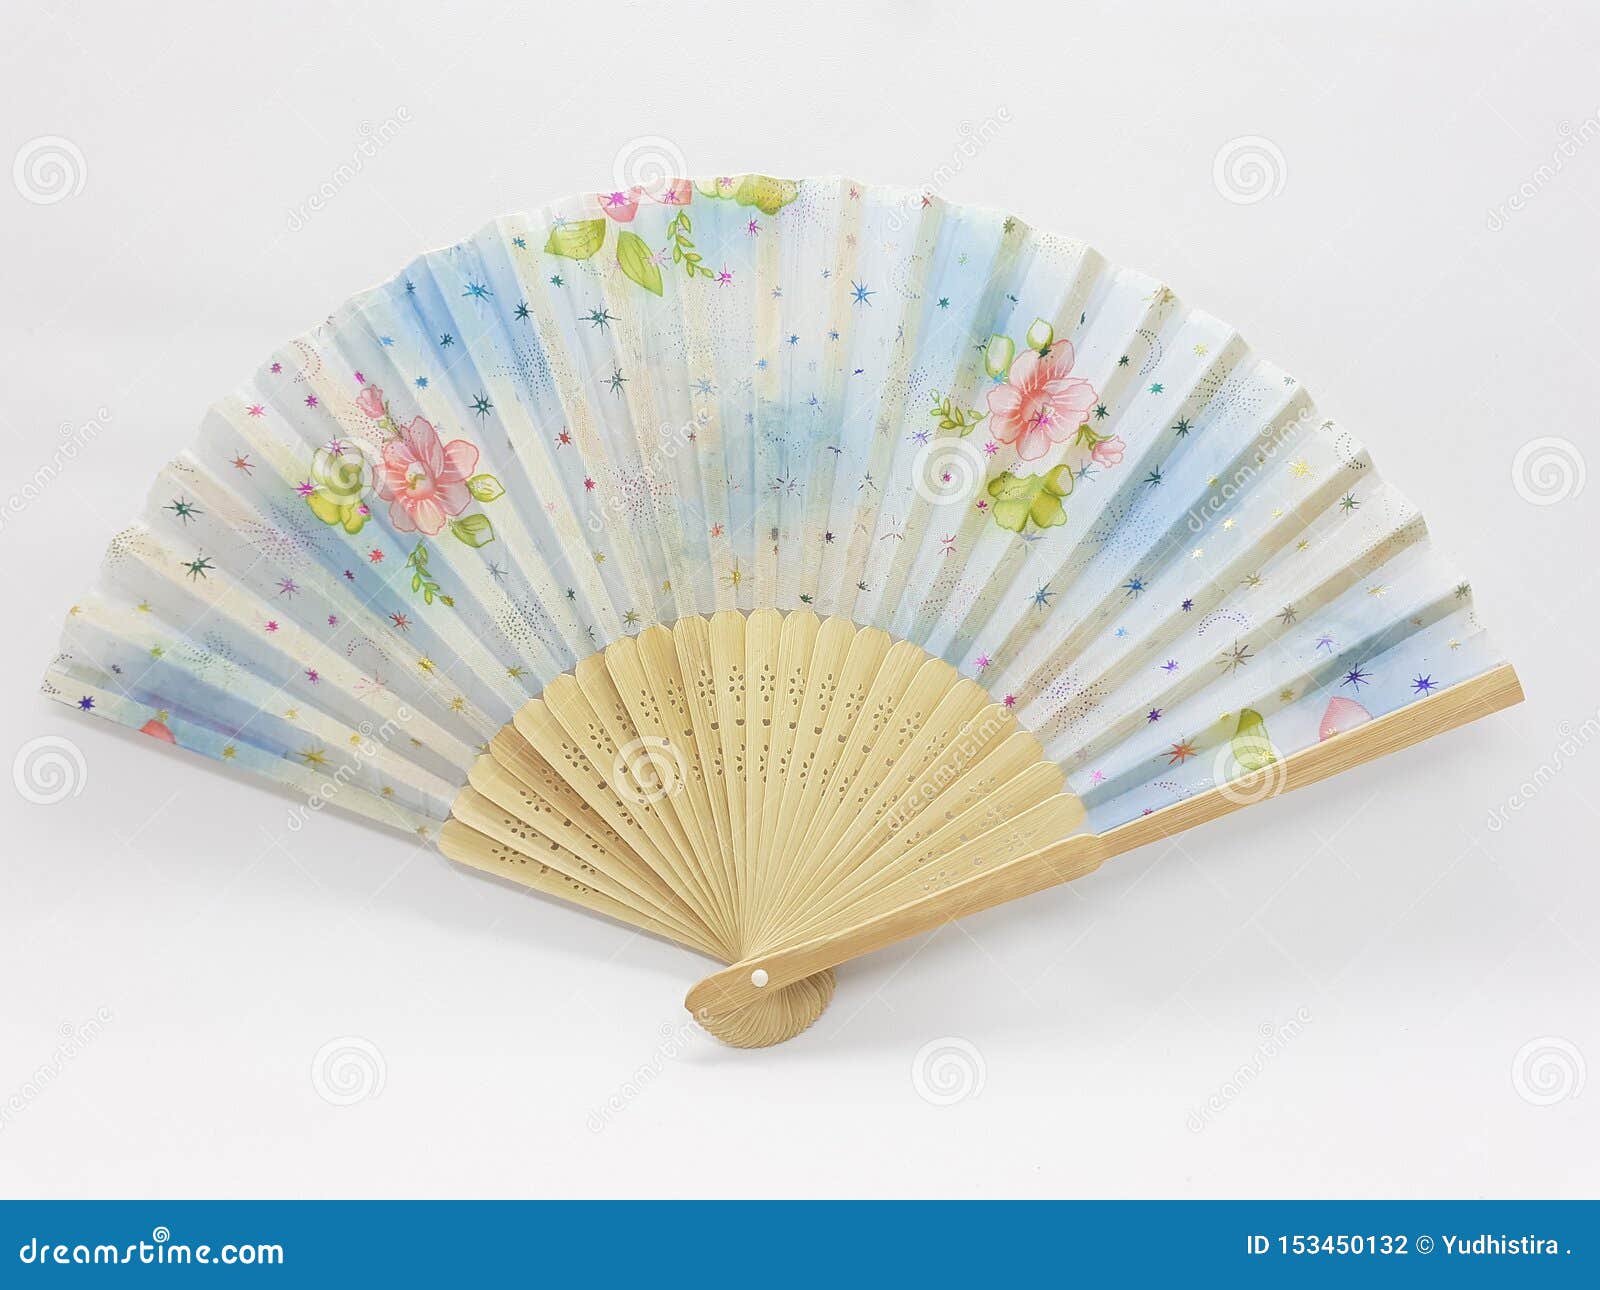 Hand Folding Fan Chinese Vintage Retro Style Handcrafted Japanese Bamboo Fabric Handheld Fans in Delicate Box 